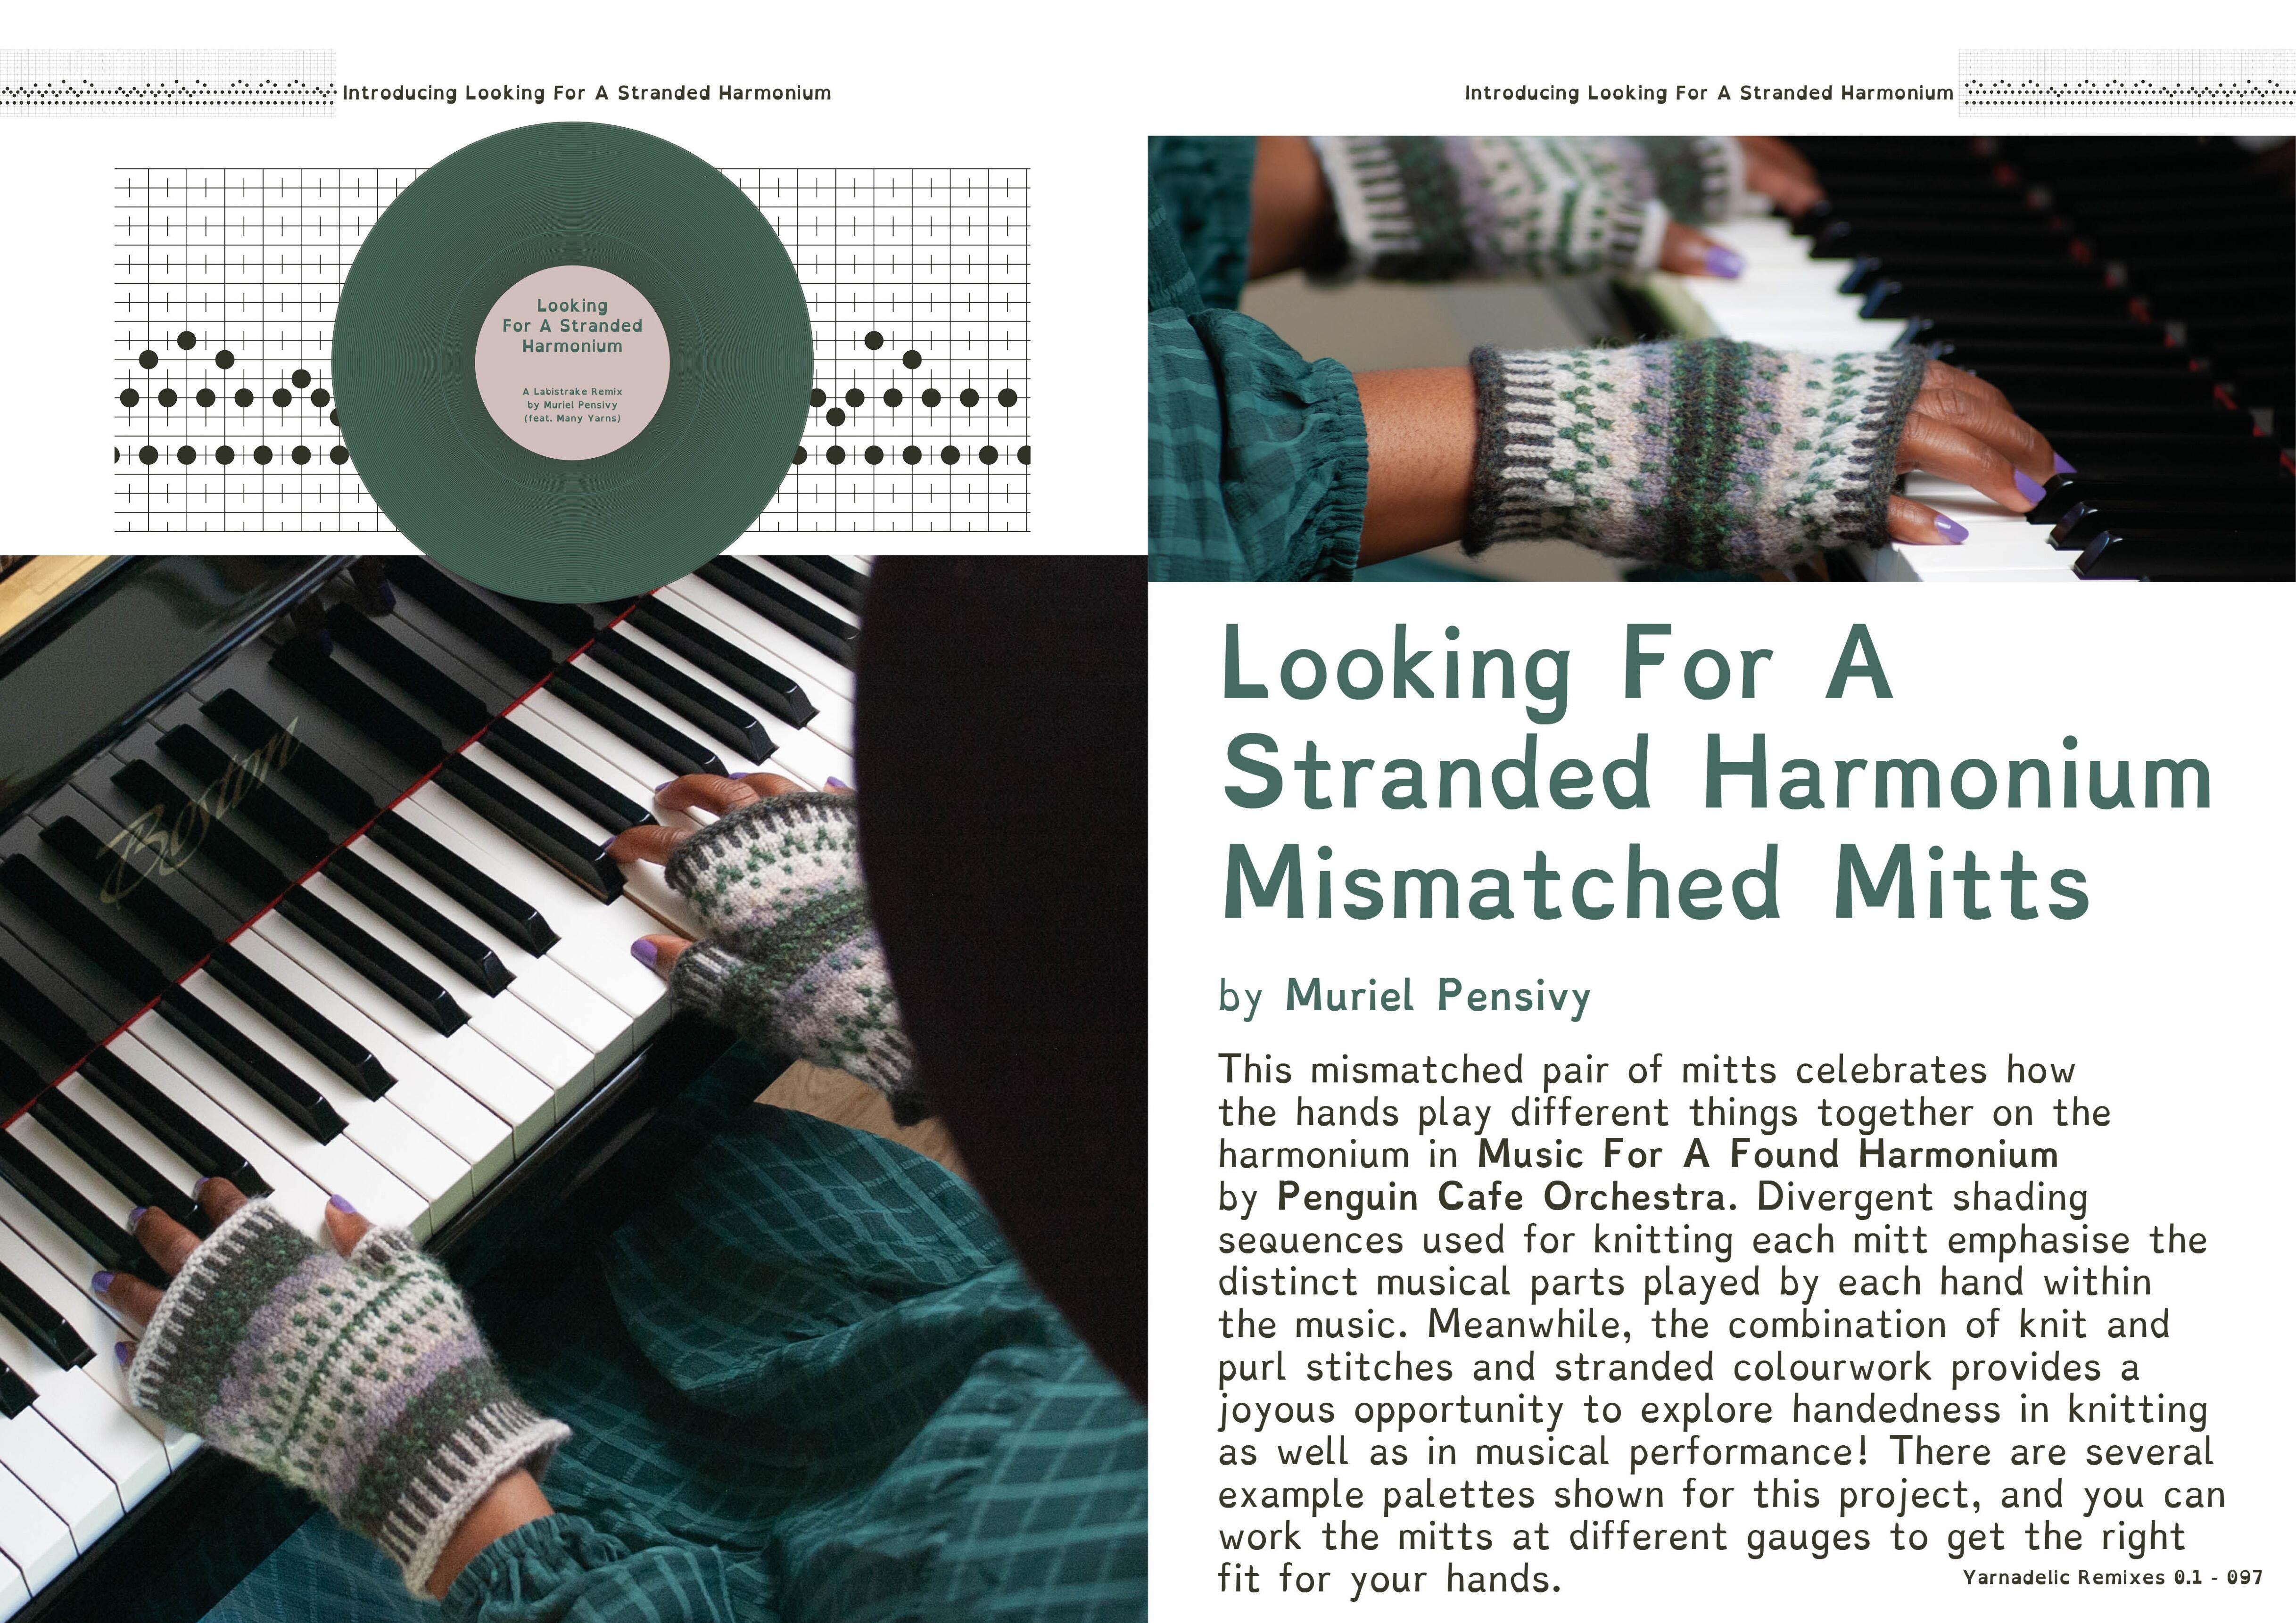 Yarnadelic Remixes 0.1 - spread introducing Looking For A Stranded Harmonium Stranded Colourwork Mitts